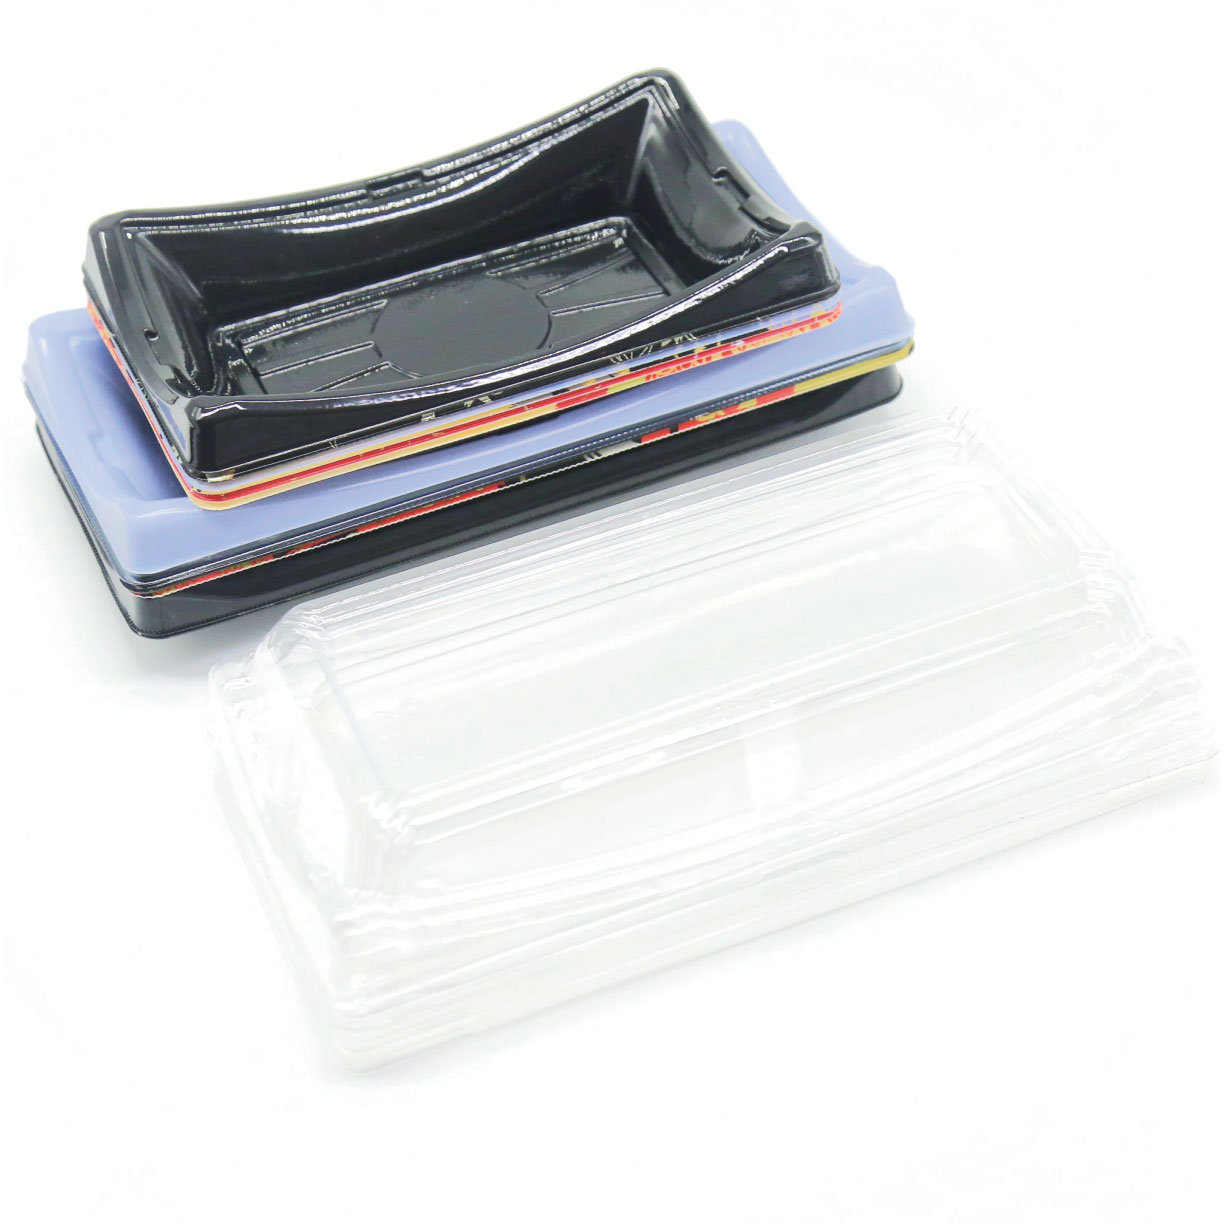 The sushi tray WL-20B is stackable for easy storage and placement.